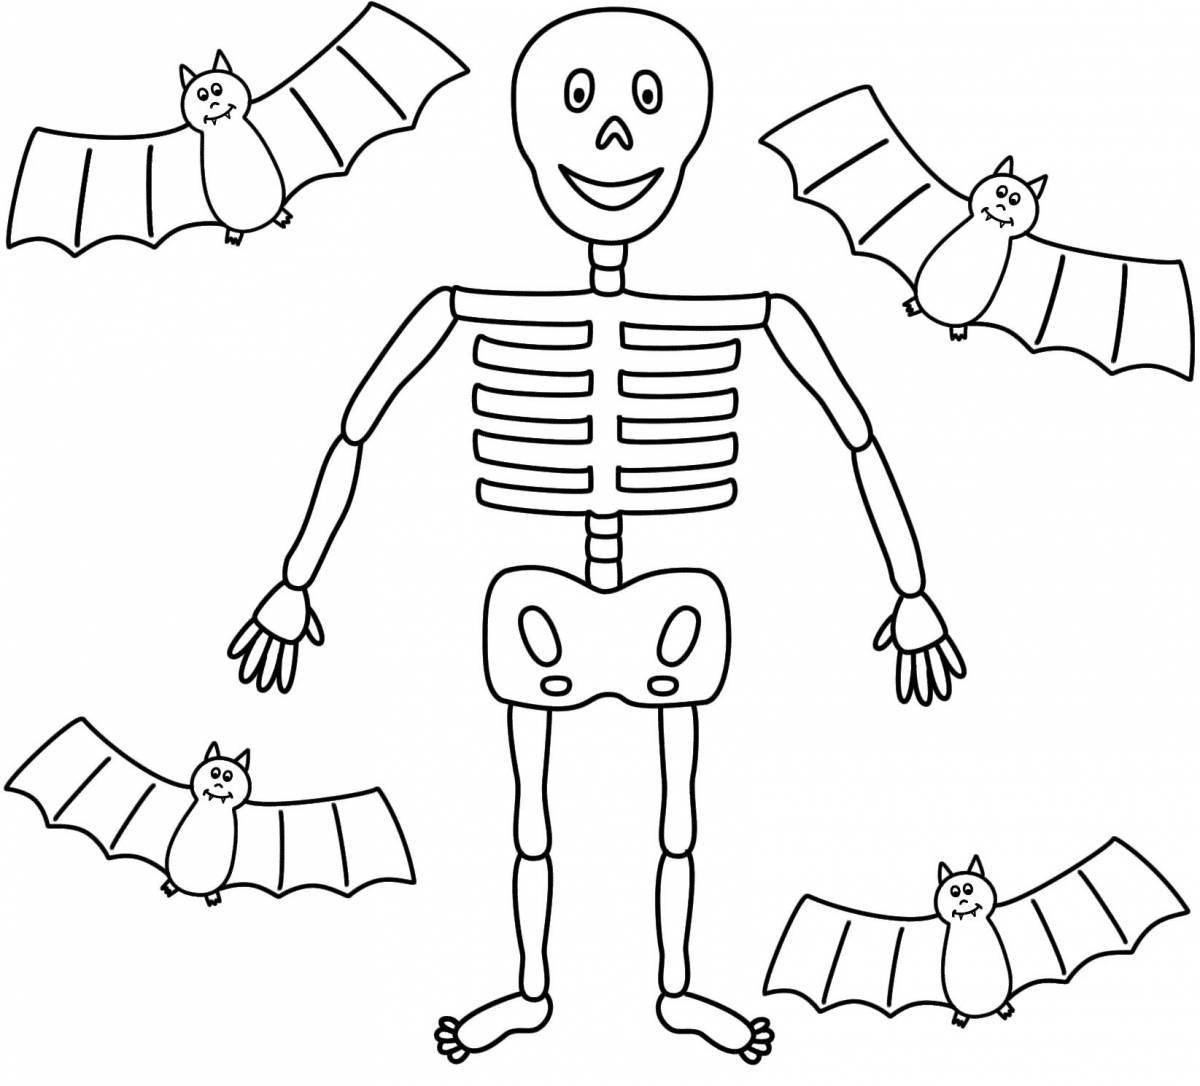 Colorful human skeleton coloring page